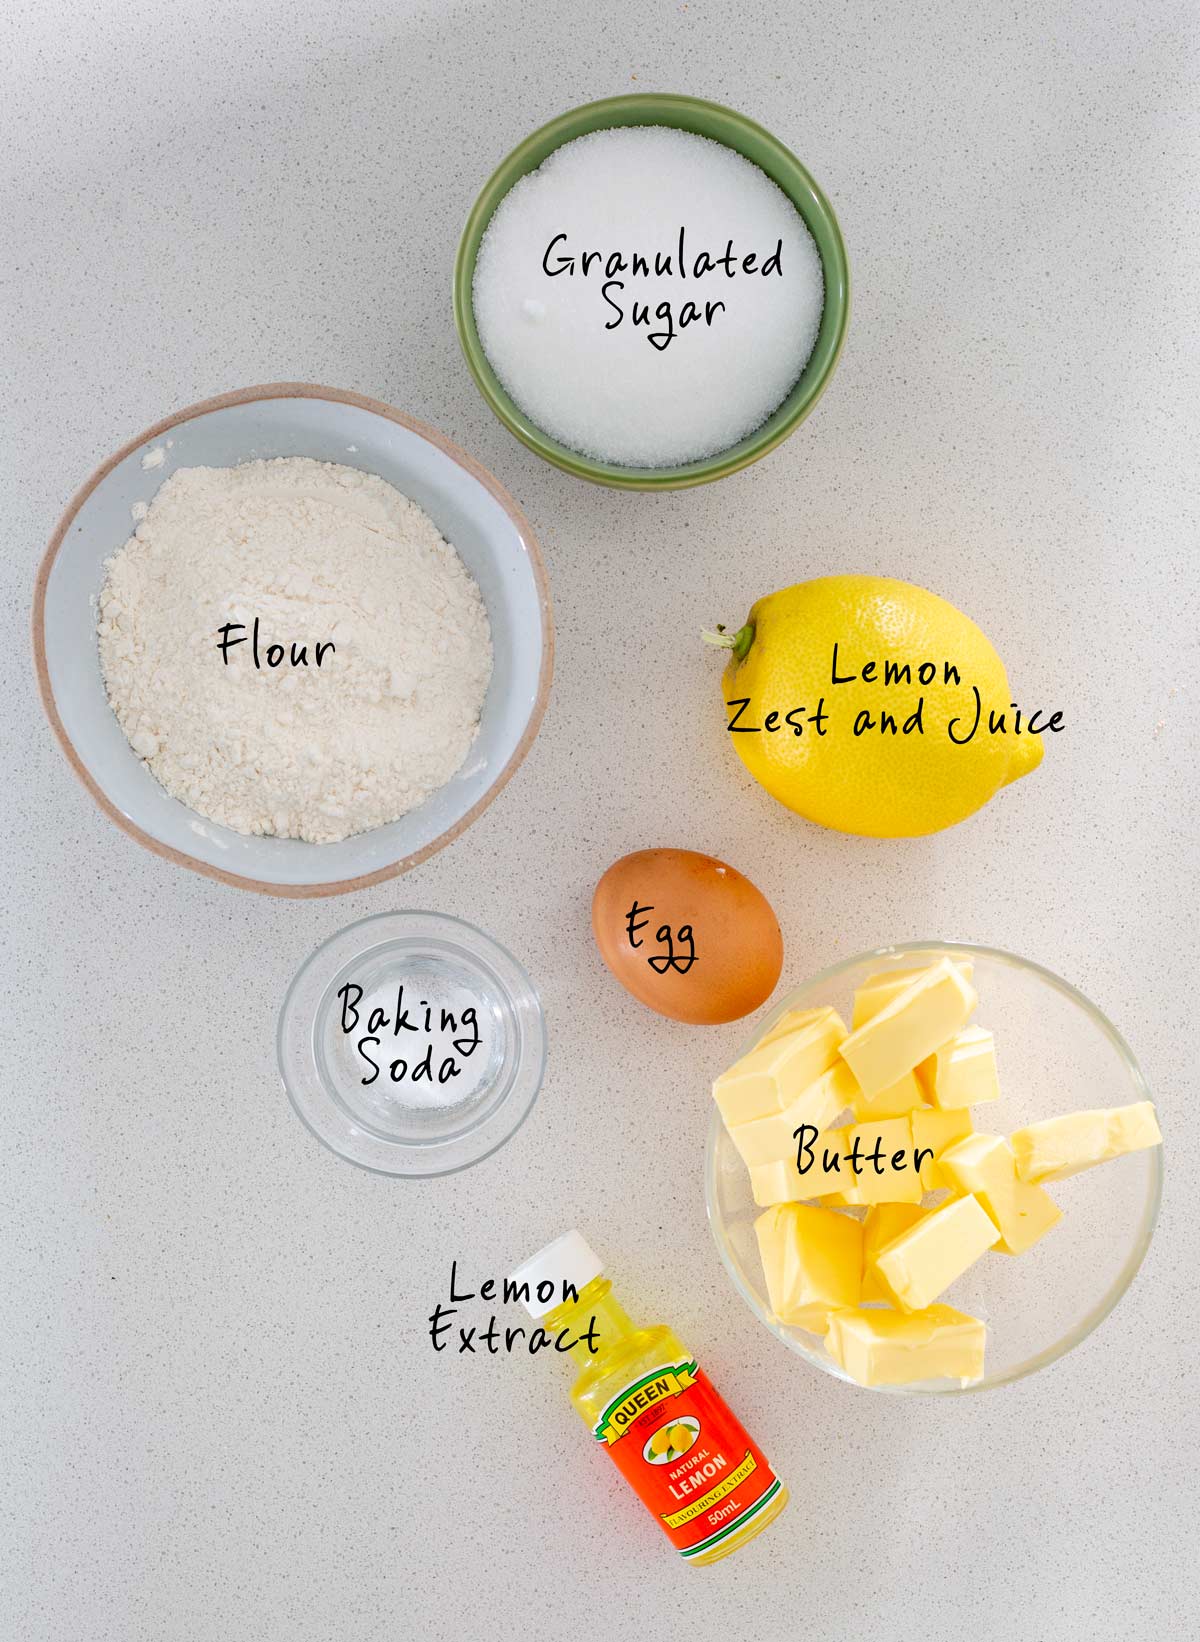 labeled ingredients for making lemon wafer cookies